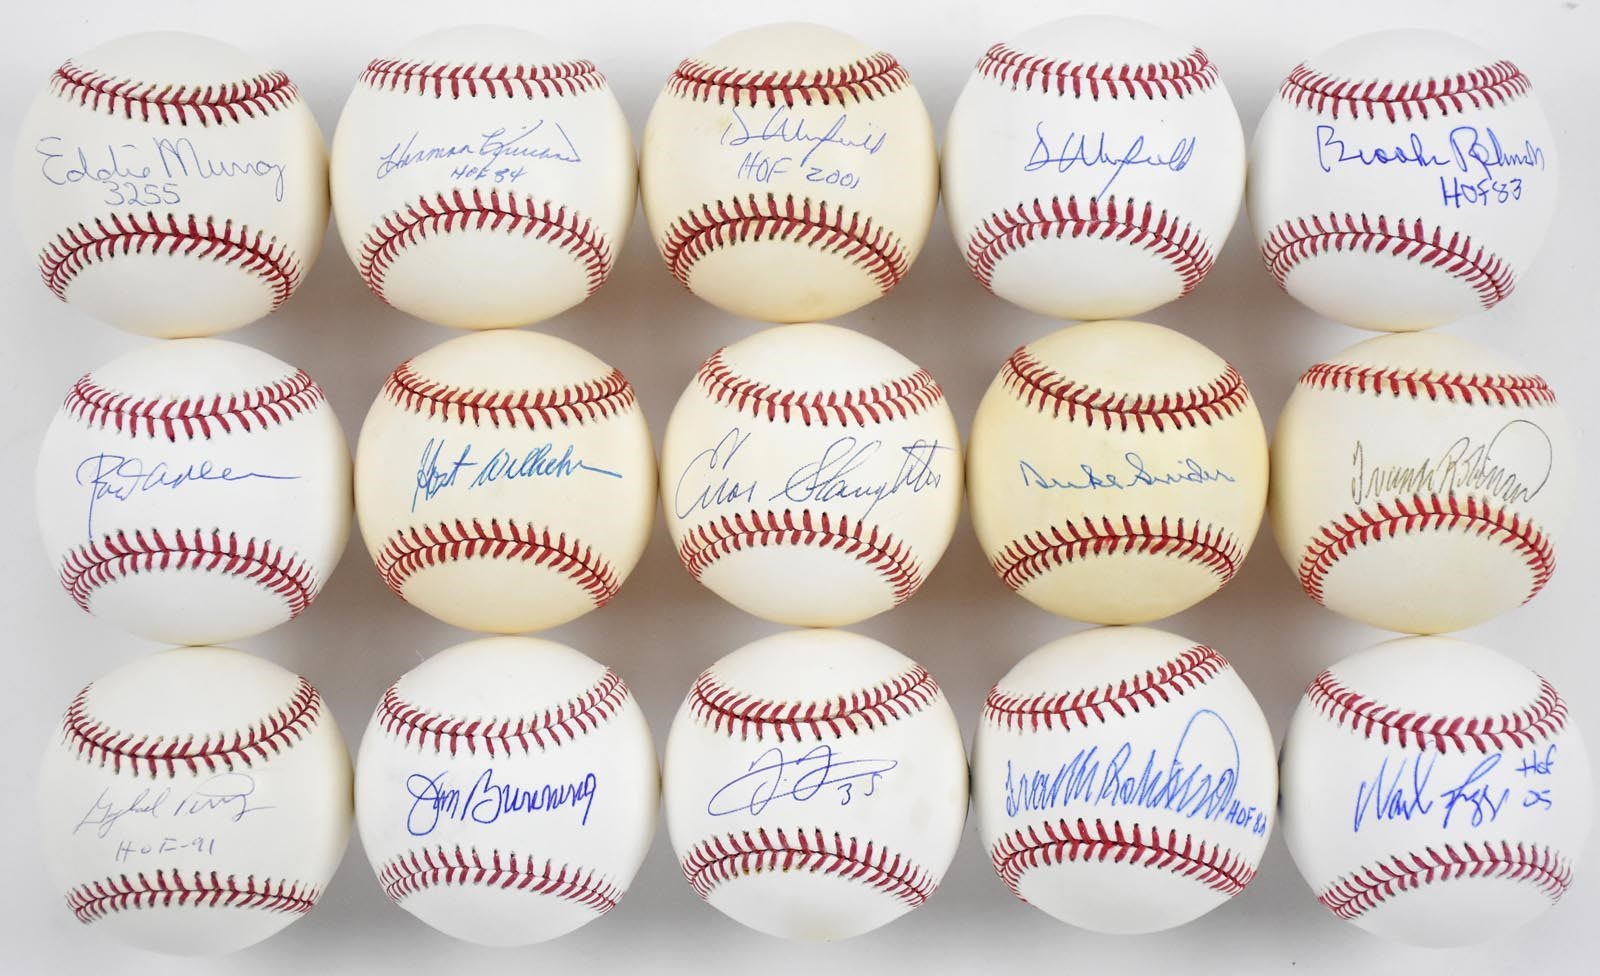 Baseball Autographs - (15) Hall of Fame Single Signed Baseball w/Inscriptions (All Certified)